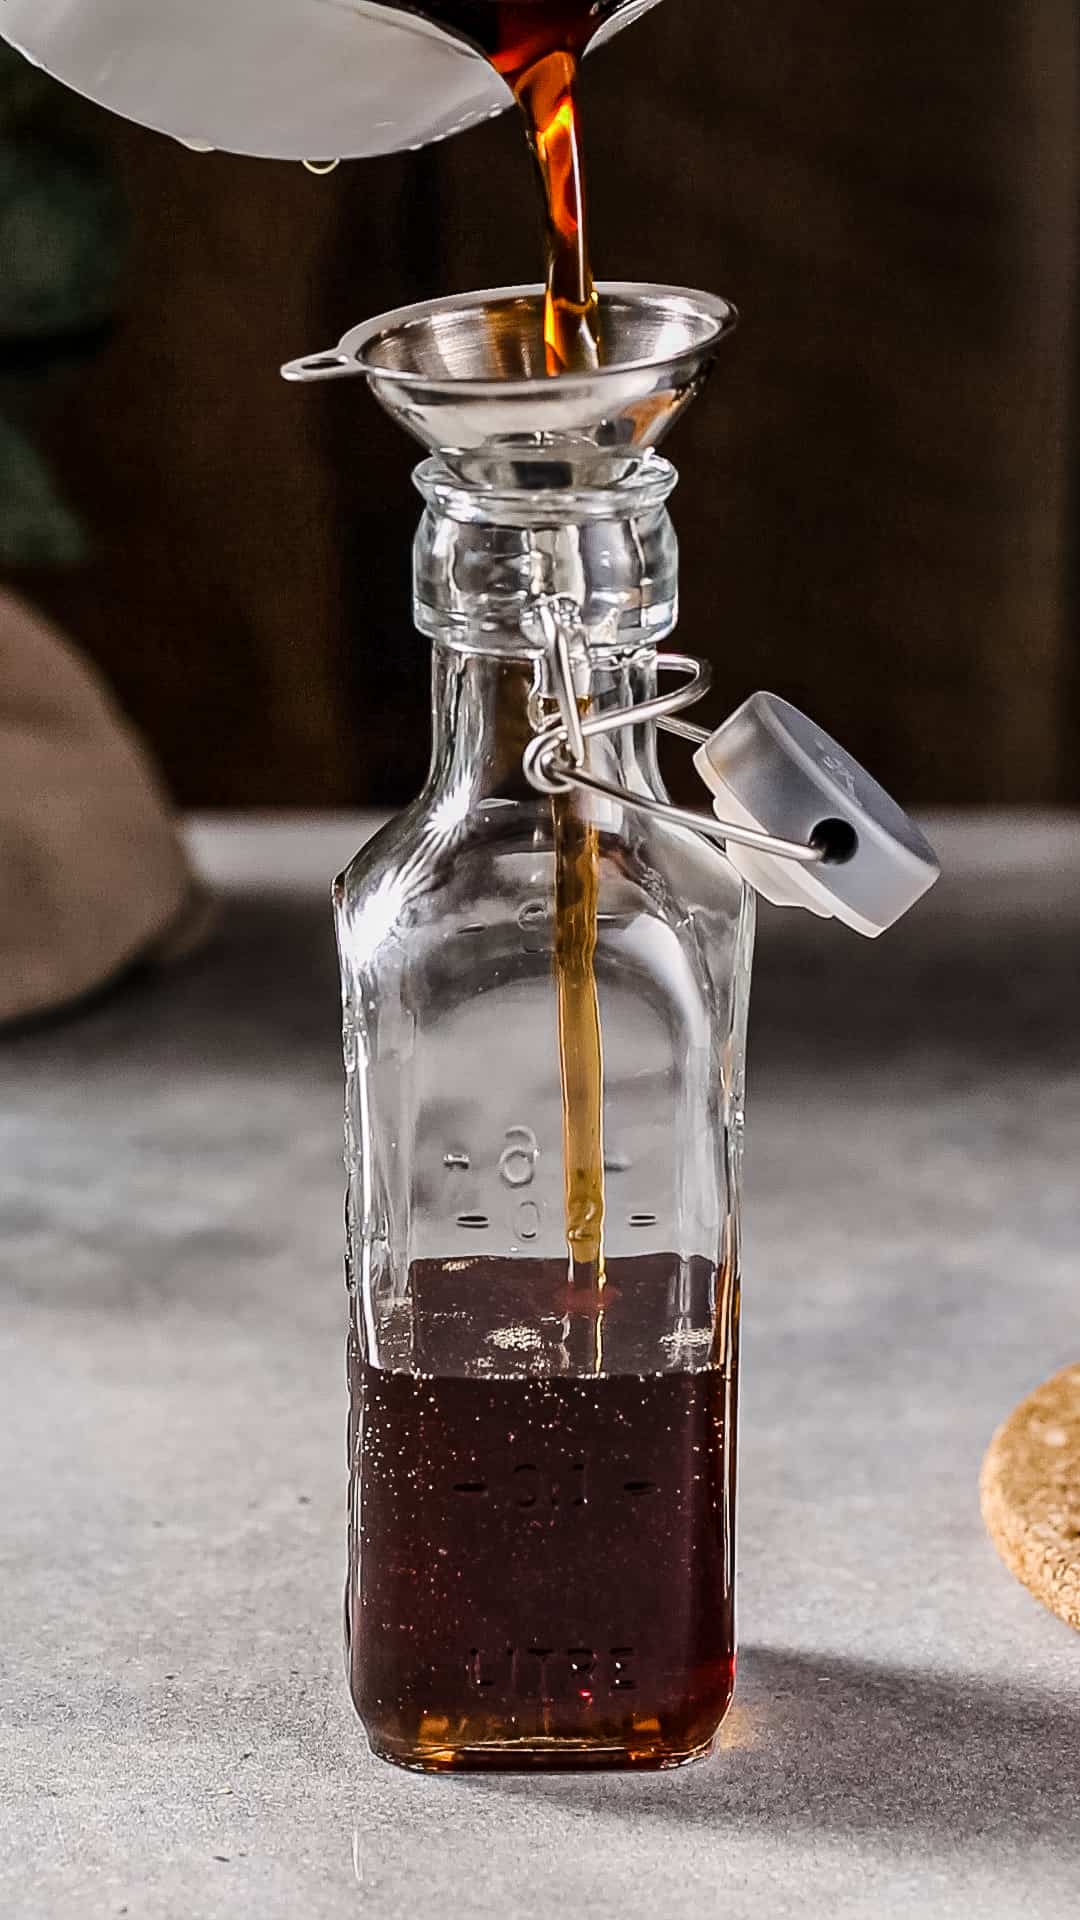 Brown liquid being poured from a white saucepan through a funnel into a glass swing-top bottle.